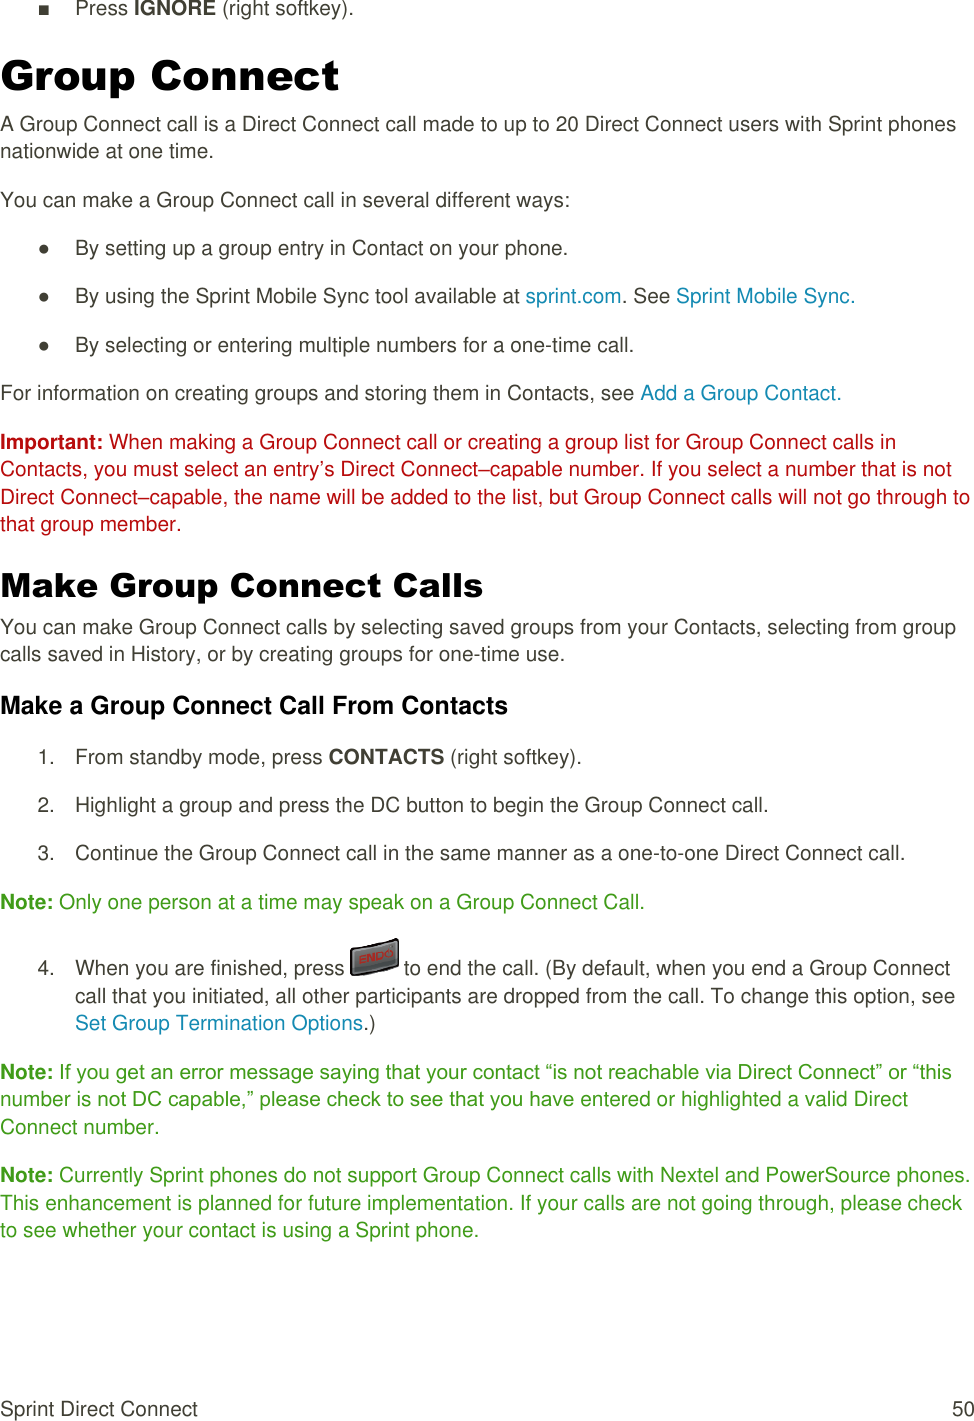  Sprint Direct Connect  50 ■  Press IGNORE (right softkey). Group Connect A Group Connect call is a Direct Connect call made to up to 20 Direct Connect users with Sprint phones nationwide at one time. You can make a Group Connect call in several different ways: ●  By setting up a group entry in Contact on your phone. ●  By using the Sprint Mobile Sync tool available at sprint.com. See Sprint Mobile Sync. ●  By selecting or entering multiple numbers for a one-time call. For information on creating groups and storing them in Contacts, see Add a Group Contact. Important: When making a Group Connect call or creating a group list for Group Connect calls in Contacts, you must select an entry’s Direct Connect–capable number. If you select a number that is not Direct Connect–capable, the name will be added to the list, but Group Connect calls will not go through to that group member. Make Group Connect Calls You can make Group Connect calls by selecting saved groups from your Contacts, selecting from group calls saved in History, or by creating groups for one-time use. Make a Group Connect Call From Contacts 1.  From standby mode, press CONTACTS (right softkey). 2.  Highlight a group and press the DC button to begin the Group Connect call. 3.  Continue the Group Connect call in the same manner as a one-to-one Direct Connect call. Note: Only one person at a time may speak on a Group Connect Call. 4.  When you are finished, press   to end the call. (By default, when you end a Group Connect call that you initiated, all other participants are dropped from the call. To change this option, see Set Group Termination Options.) Note: If you get an error message saying that your contact “is not reachable via Direct Connect” or “this number is not DC capable,” please check to see that you have entered or highlighted a valid Direct Connect number. Note: Currently Sprint phones do not support Group Connect calls with Nextel and PowerSource phones. This enhancement is planned for future implementation. If your calls are not going through, please check to see whether your contact is using a Sprint phone. 